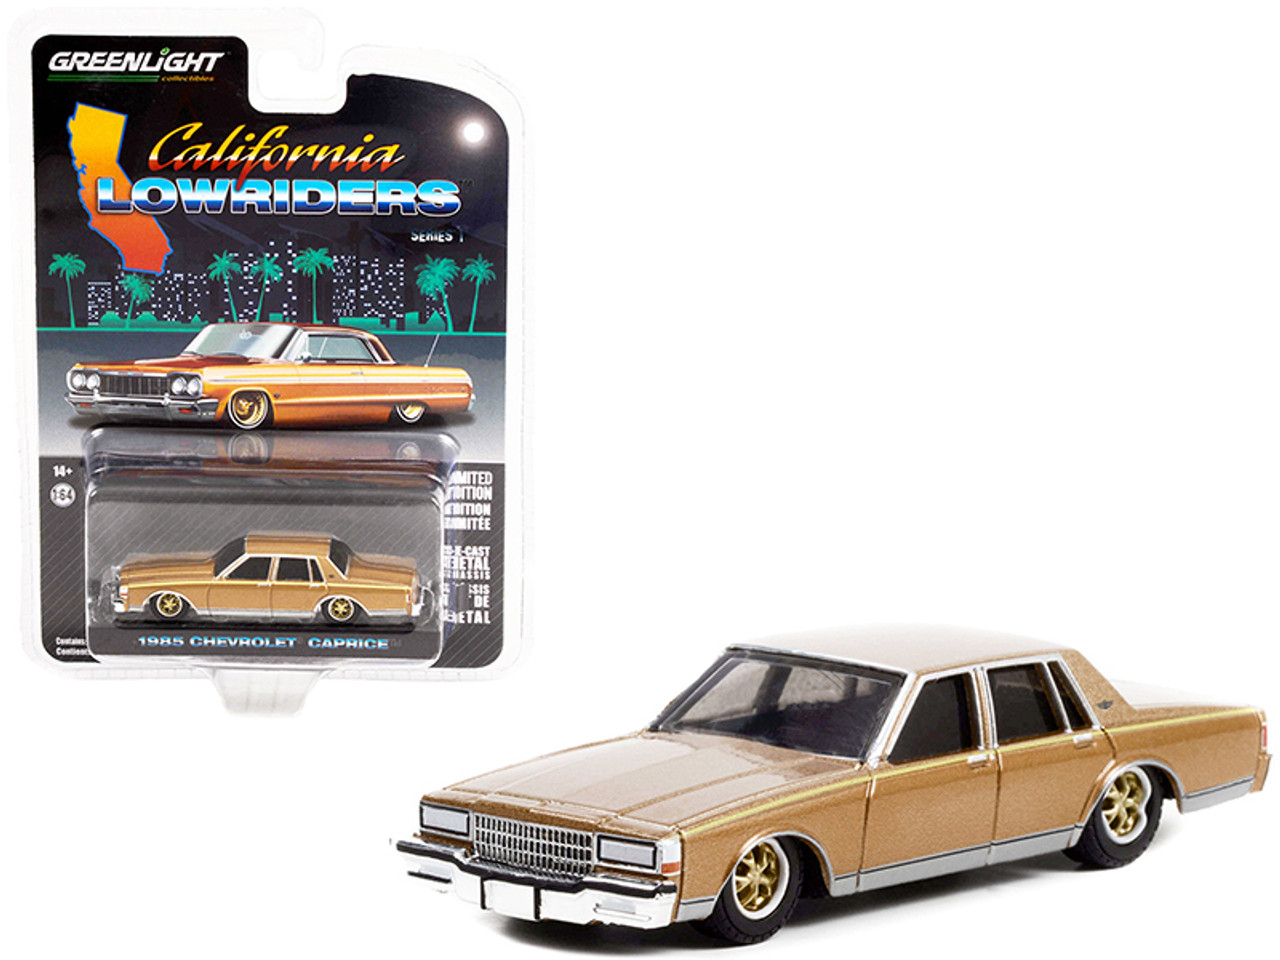 Racing Champions 1:64 Diecast Car '85 Buick Regal T-Type Limited By Auto  World